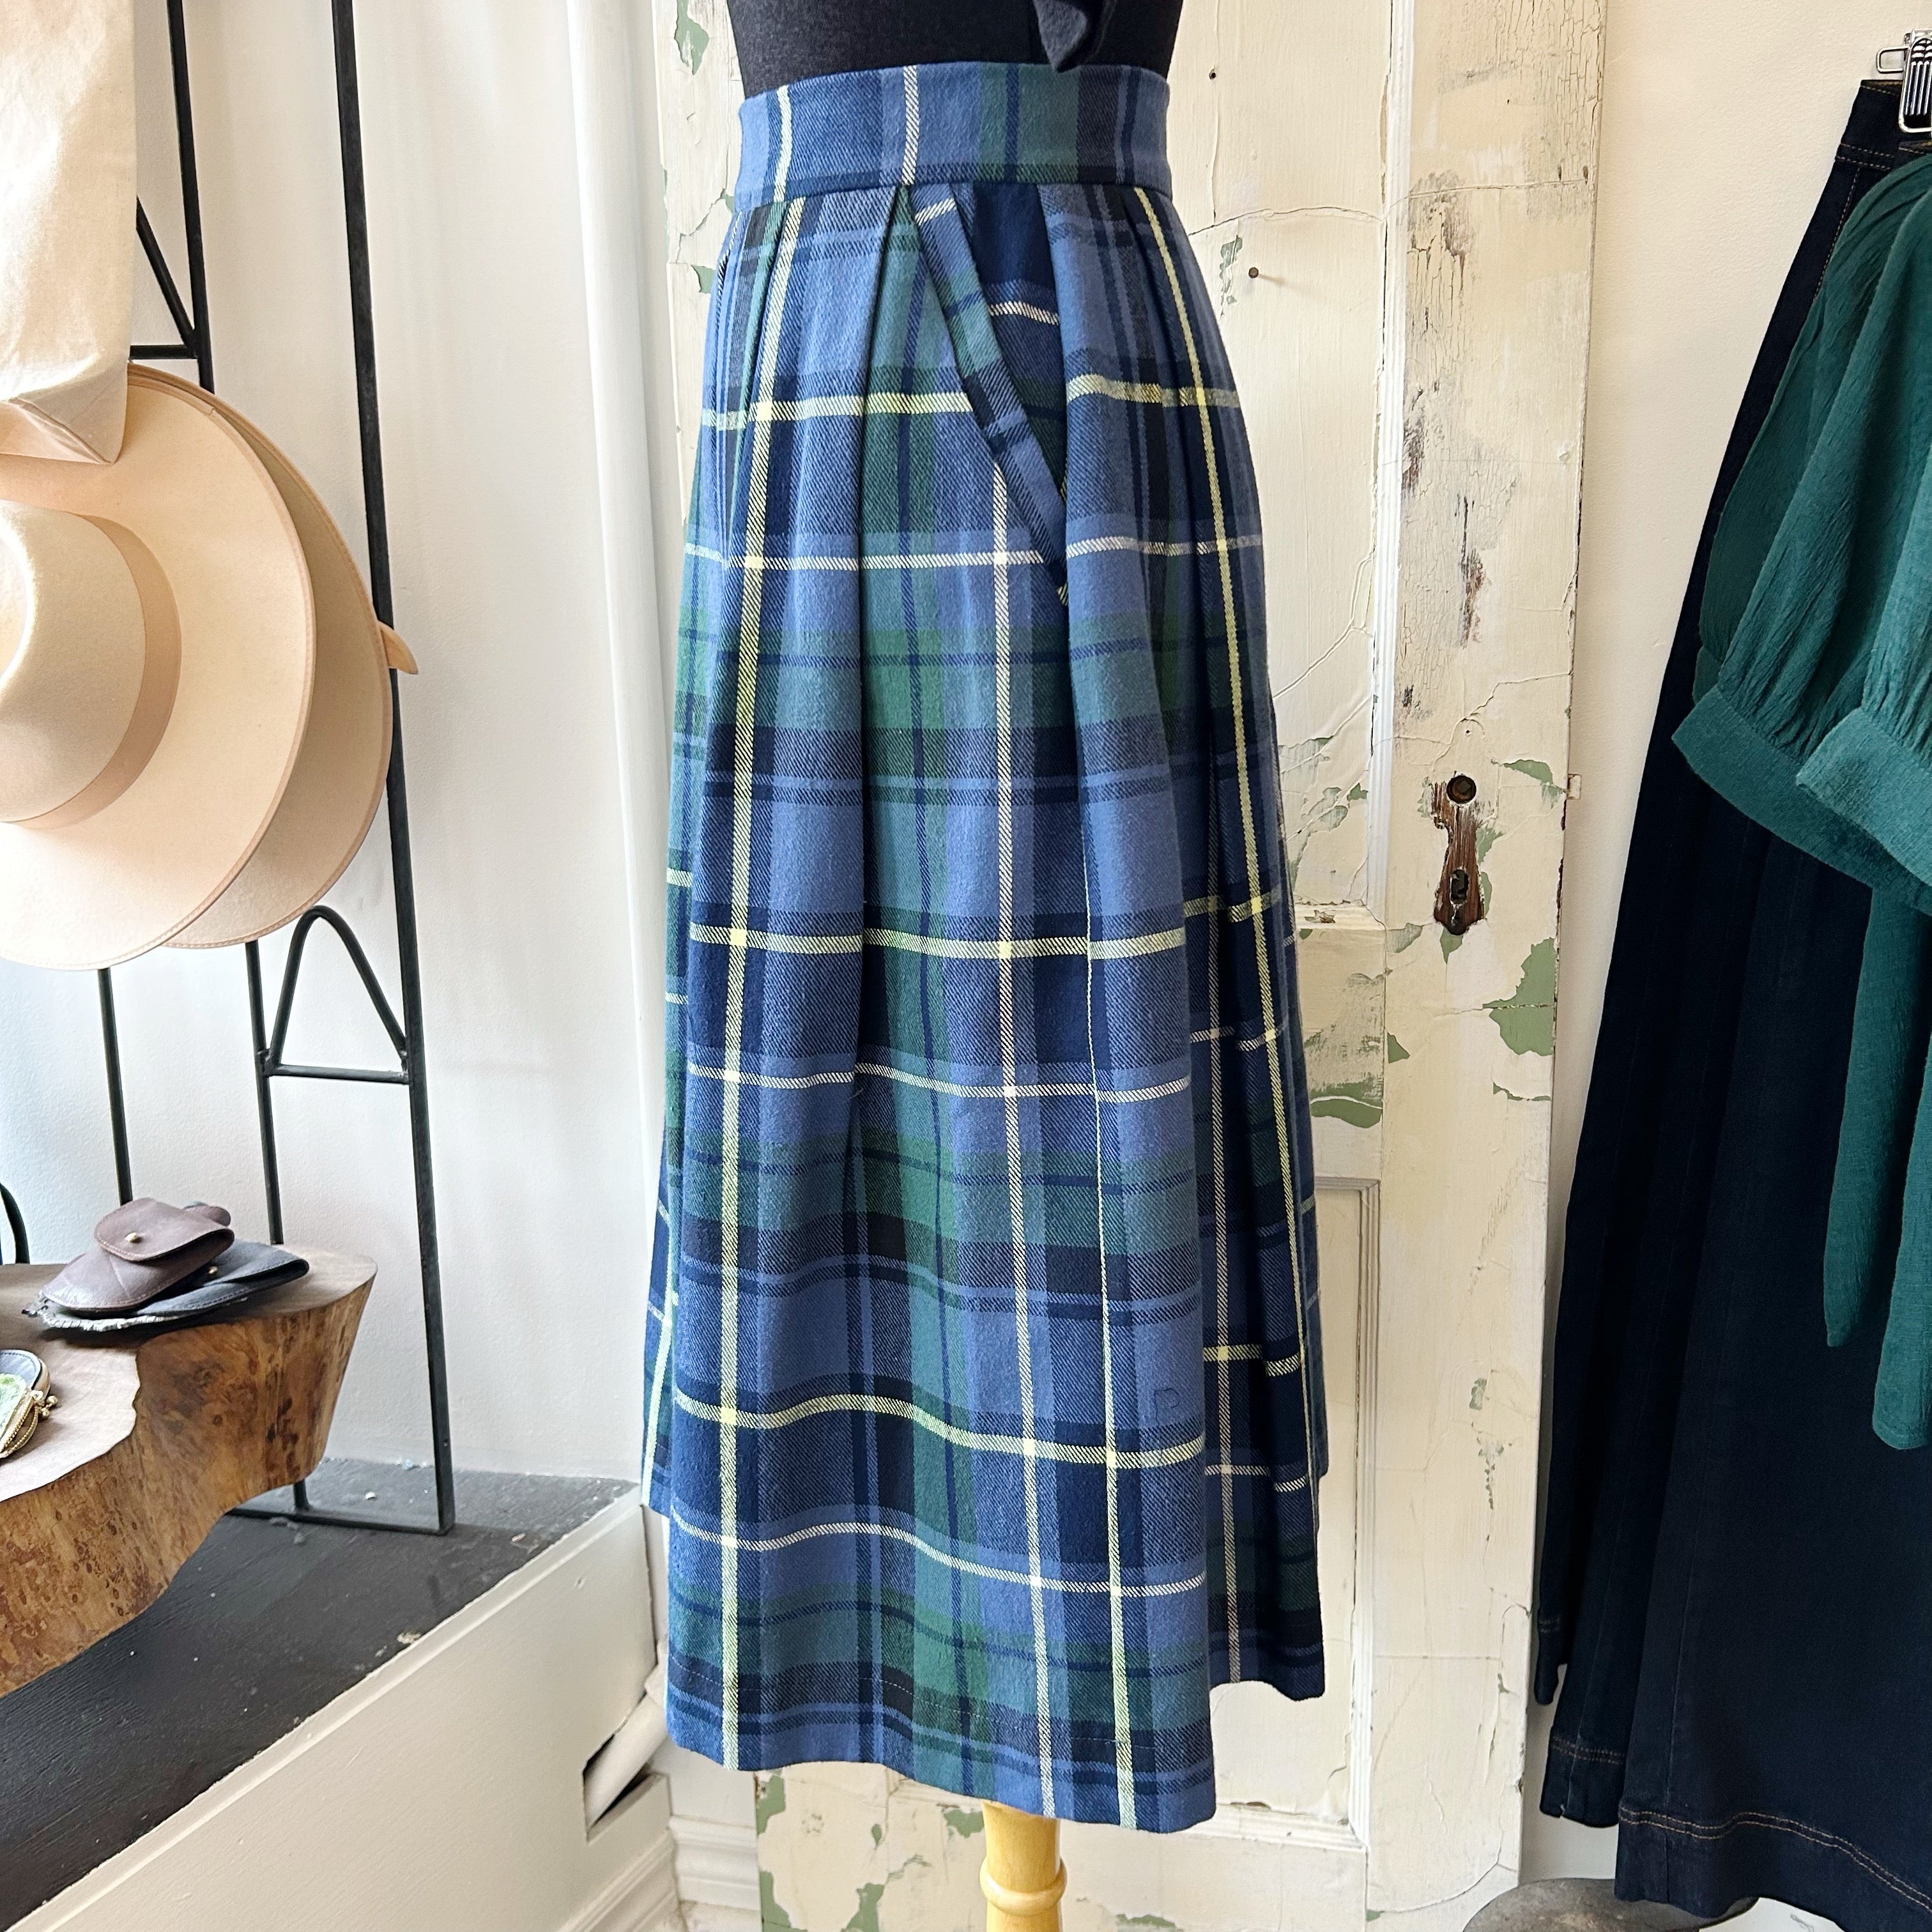 Bodybag by Jude // Sussex Skirt Plaid